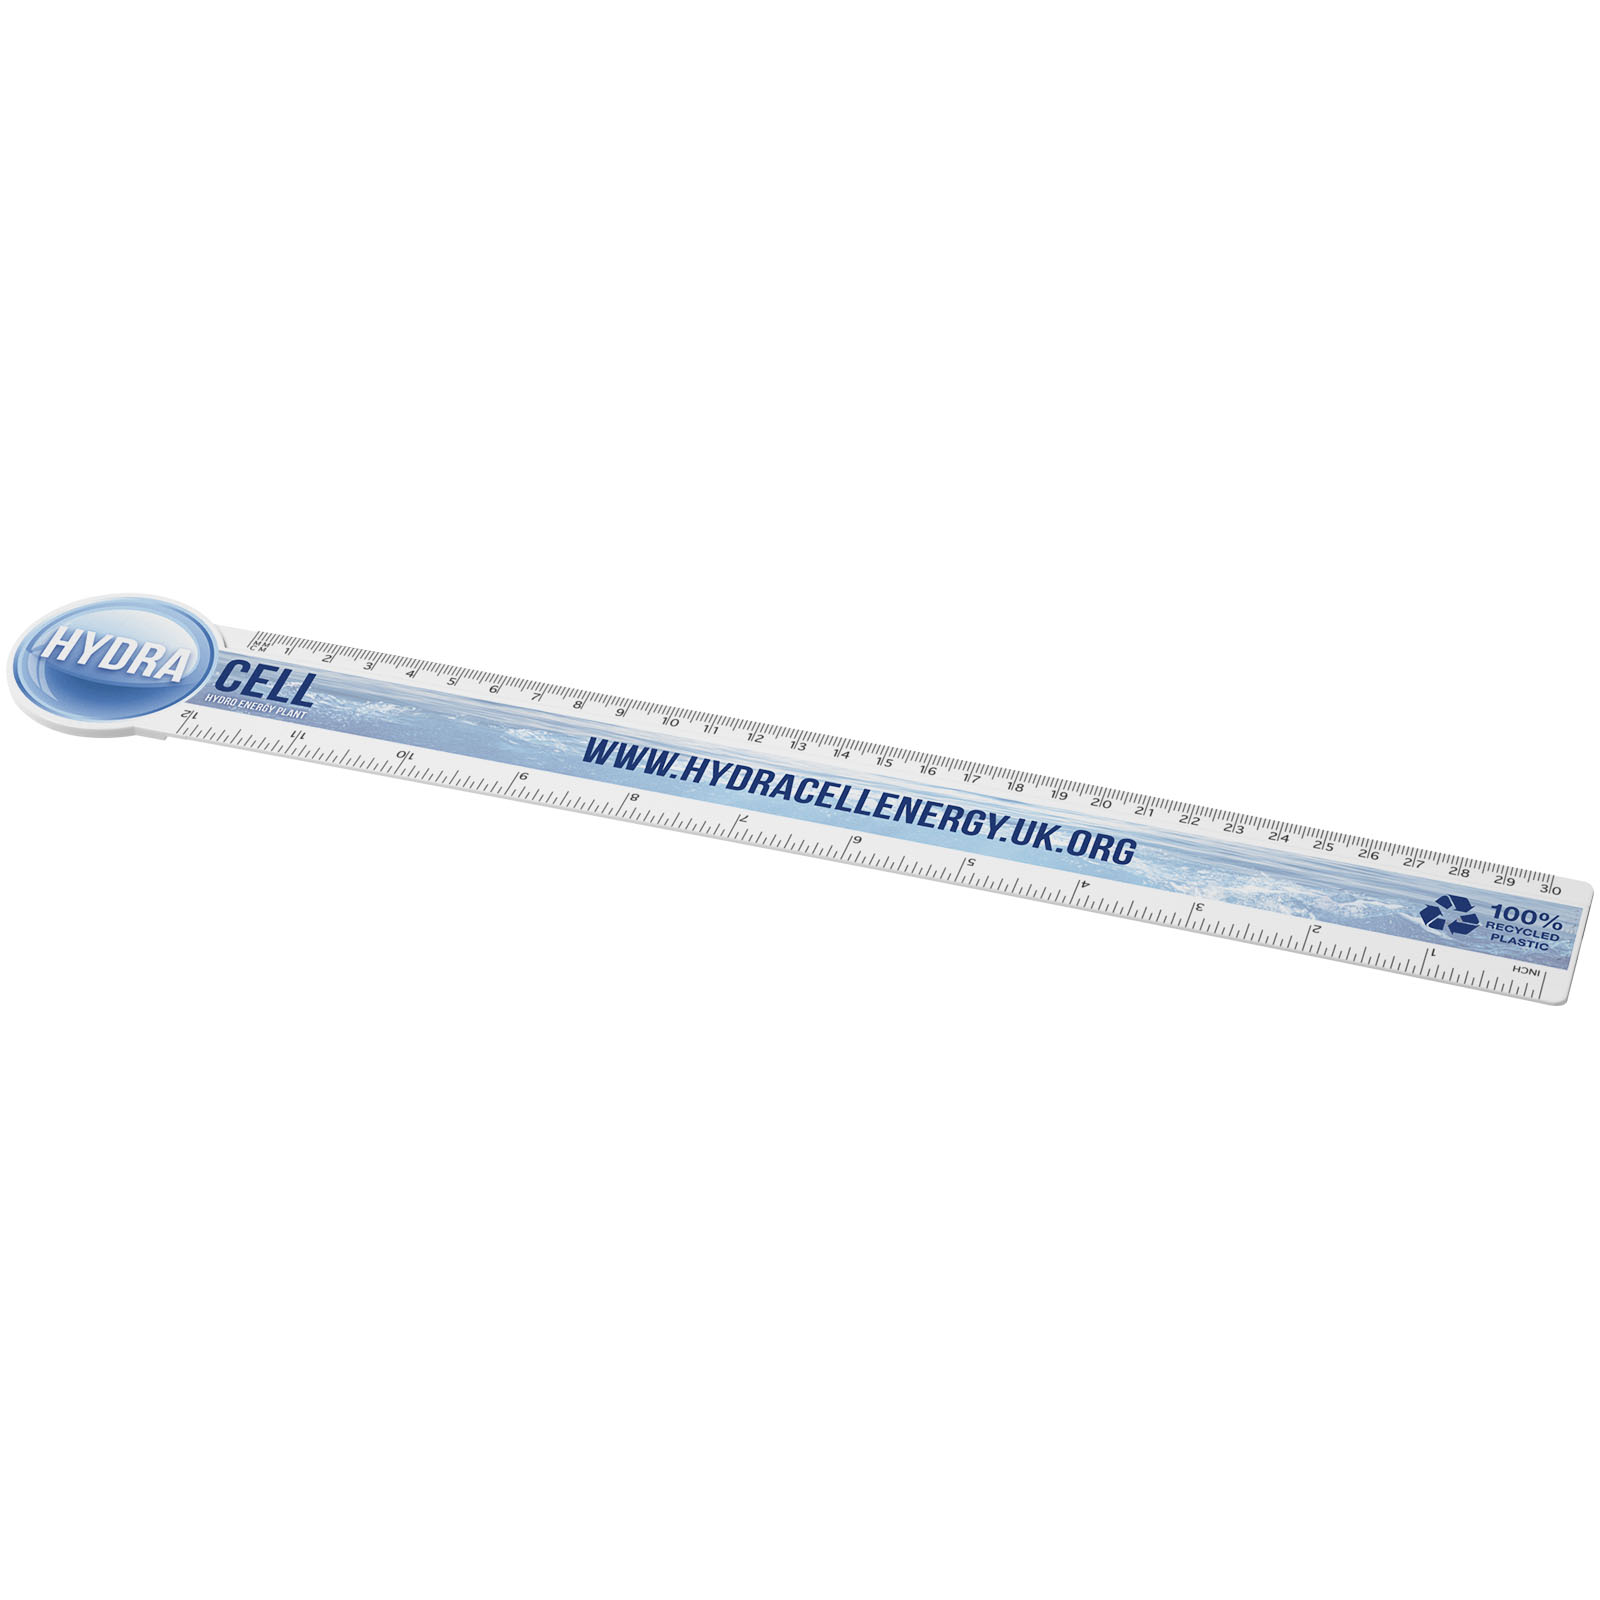 Advertising Desk Accessories - Tait 30cm circle-shaped recycled plastic ruler